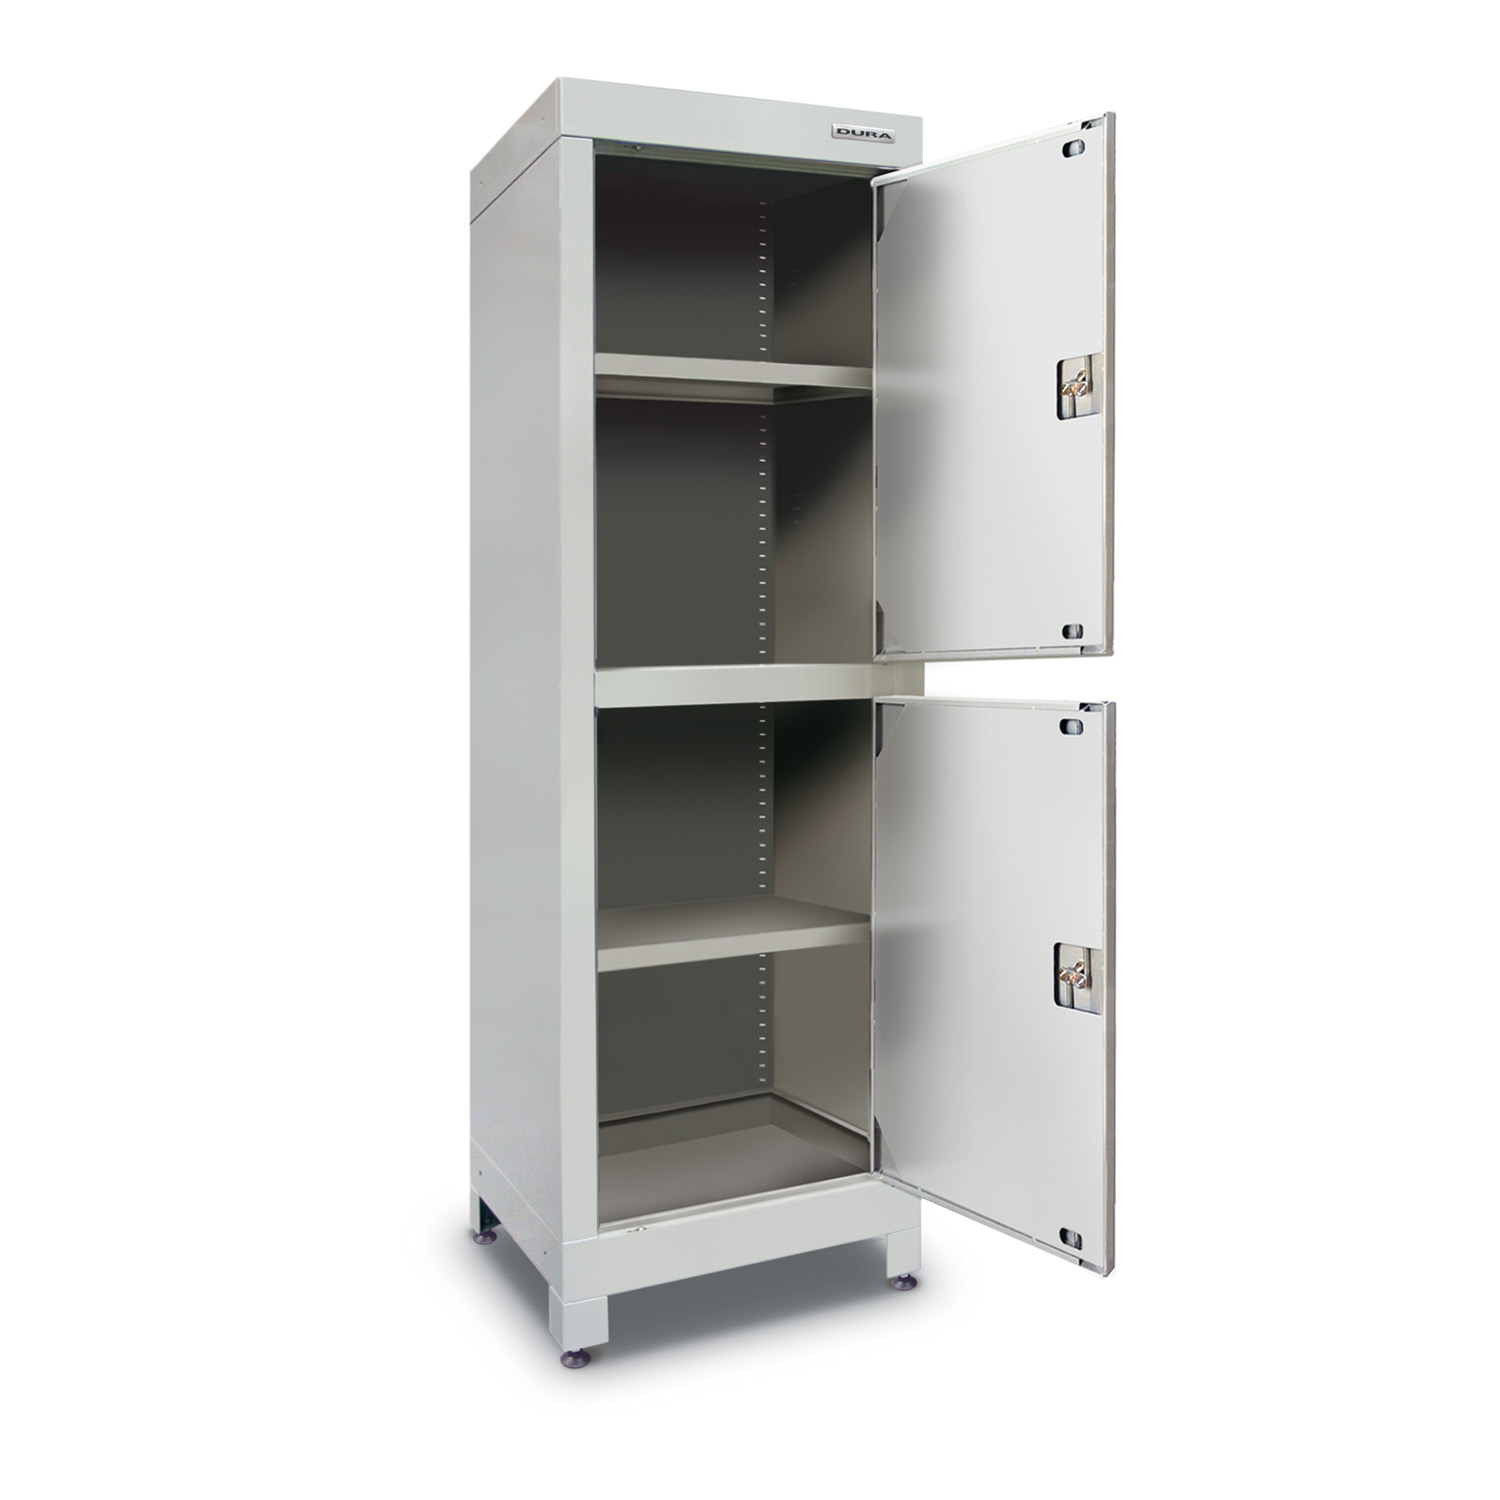 Tall base cabinet with 2 doors (600mm)